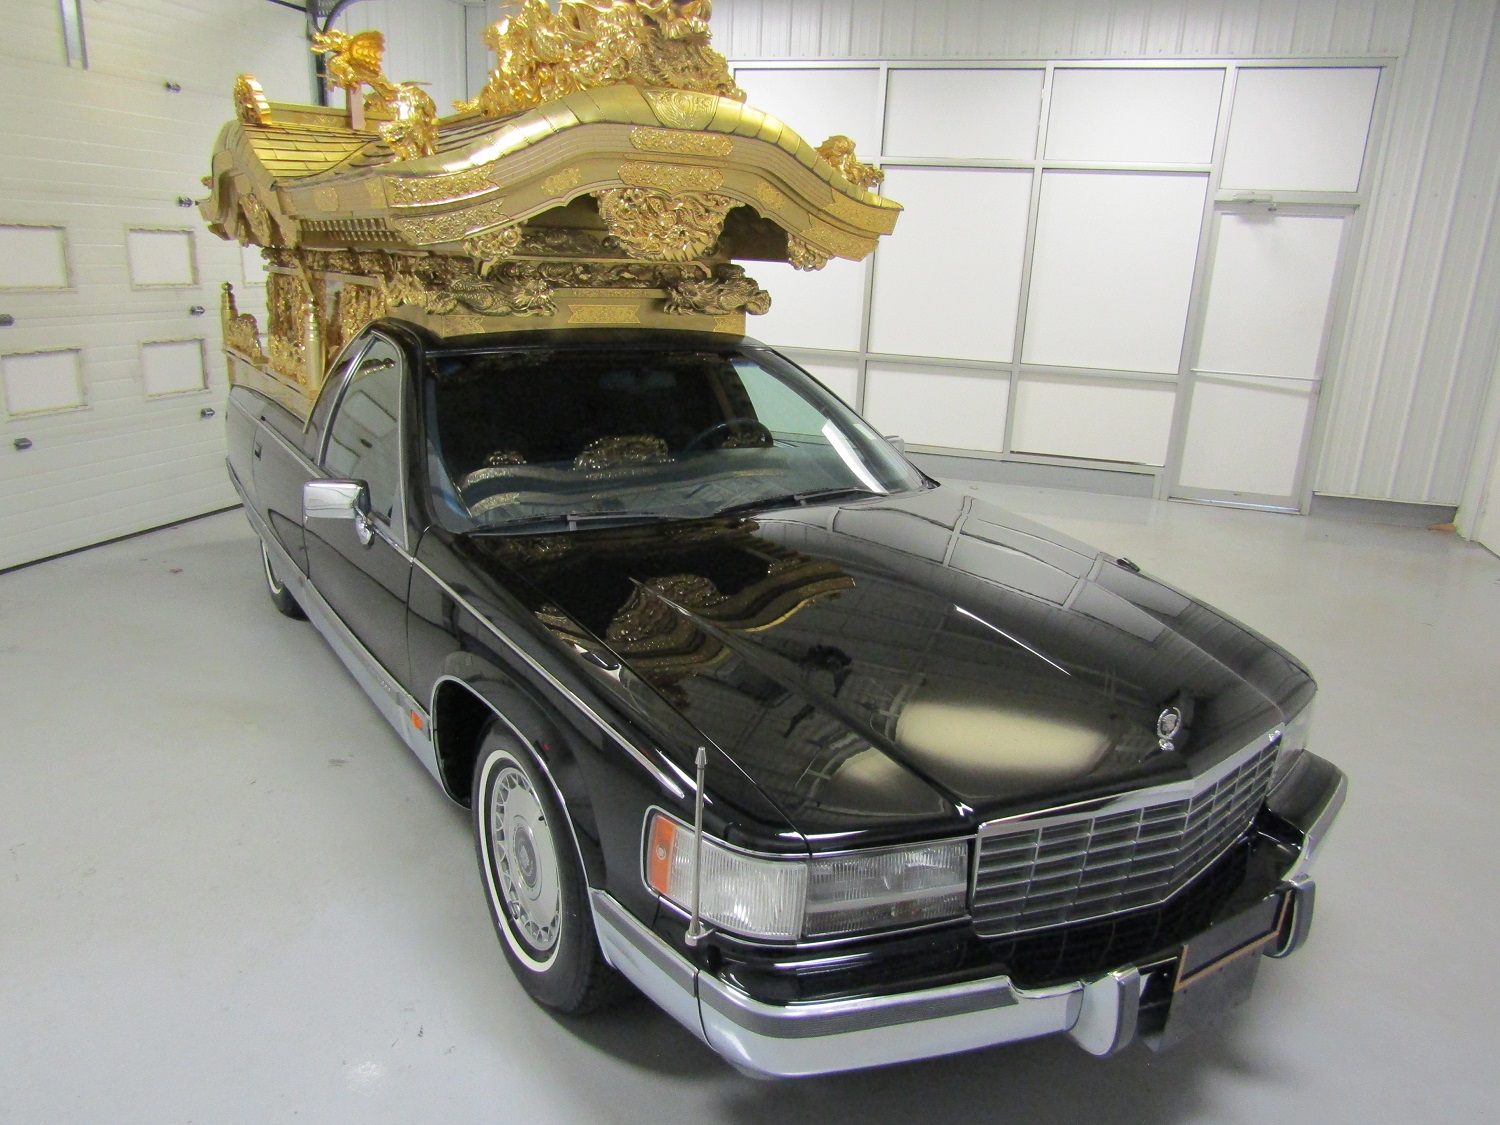 1993 Cadillac Fleetwood Hearse For Sale | GM Authority